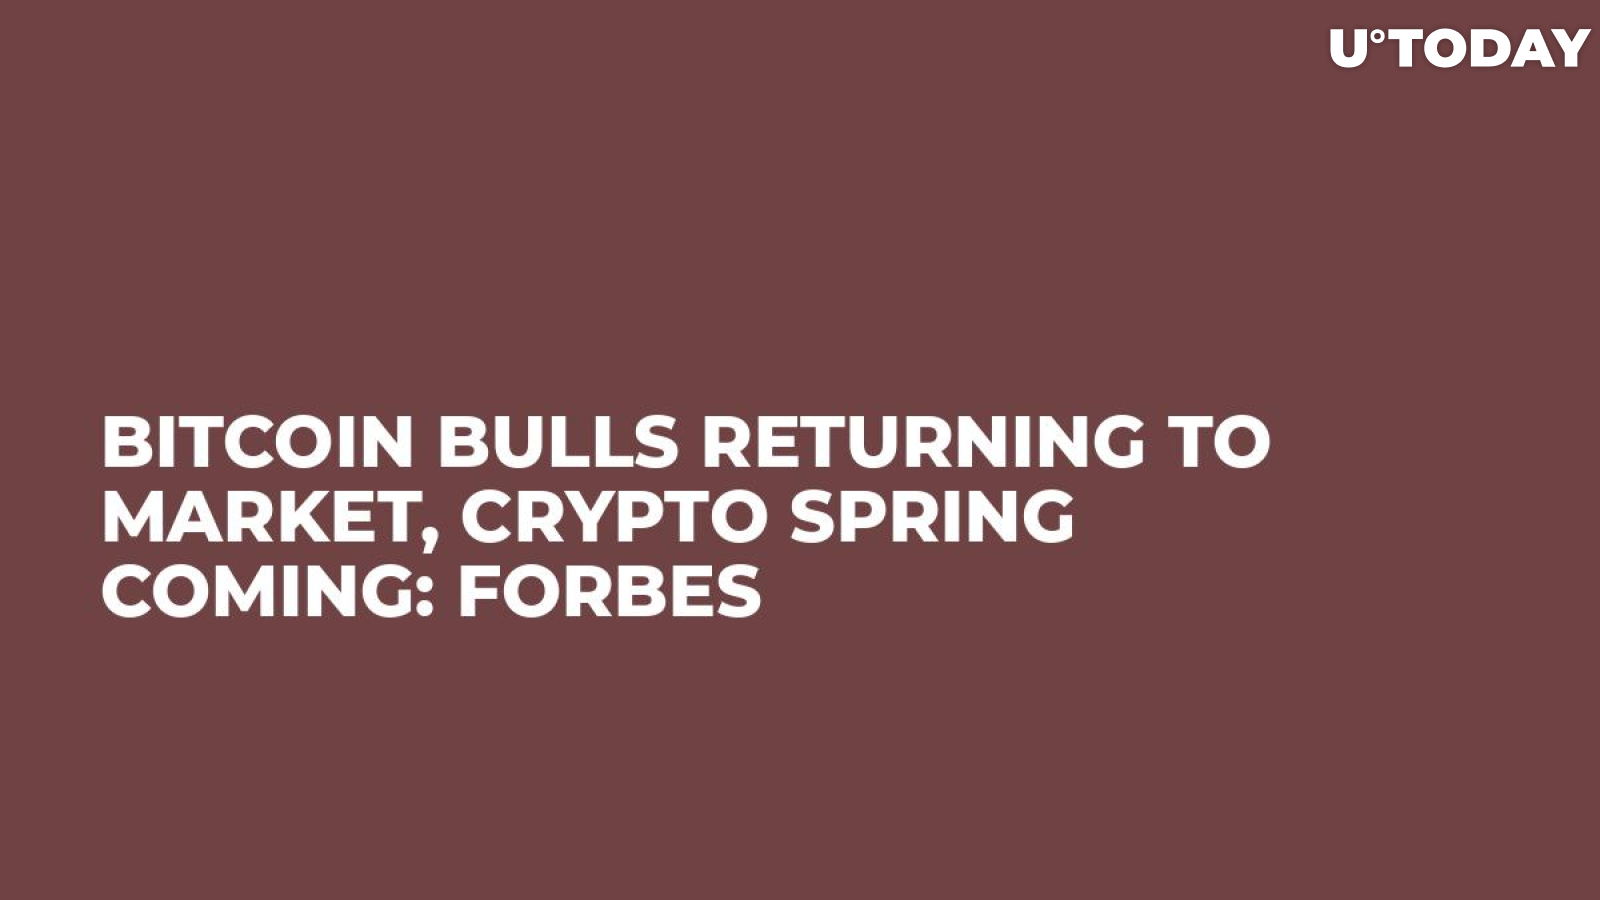 Bitcoin Bulls Returning to Market, Crypto Spring Coming: Forbes